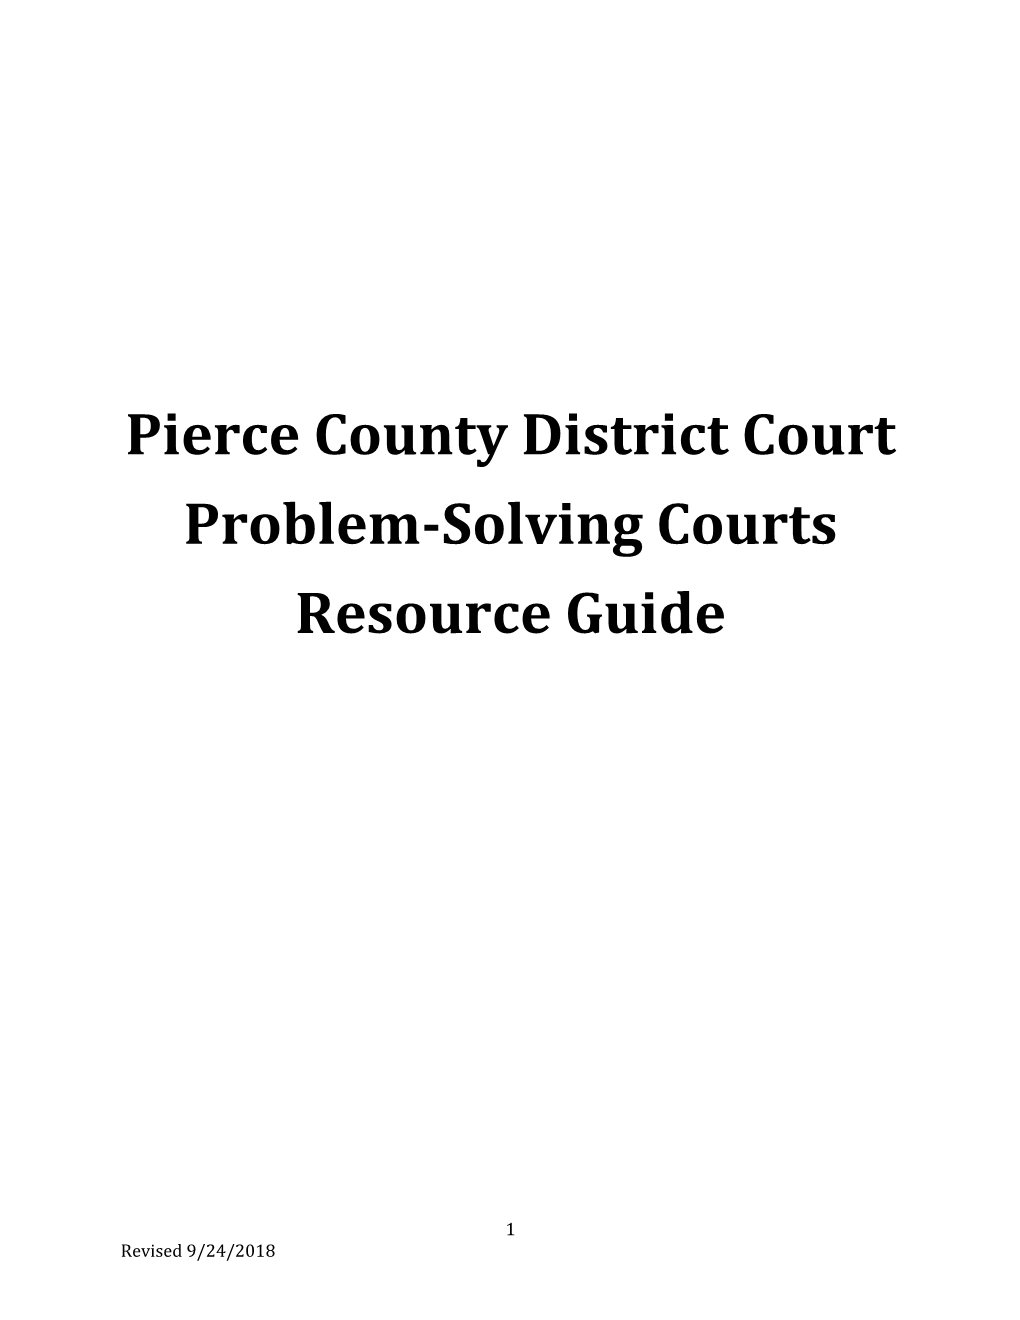 Pierce County District Court Problem-Solving Courts Resource Guide